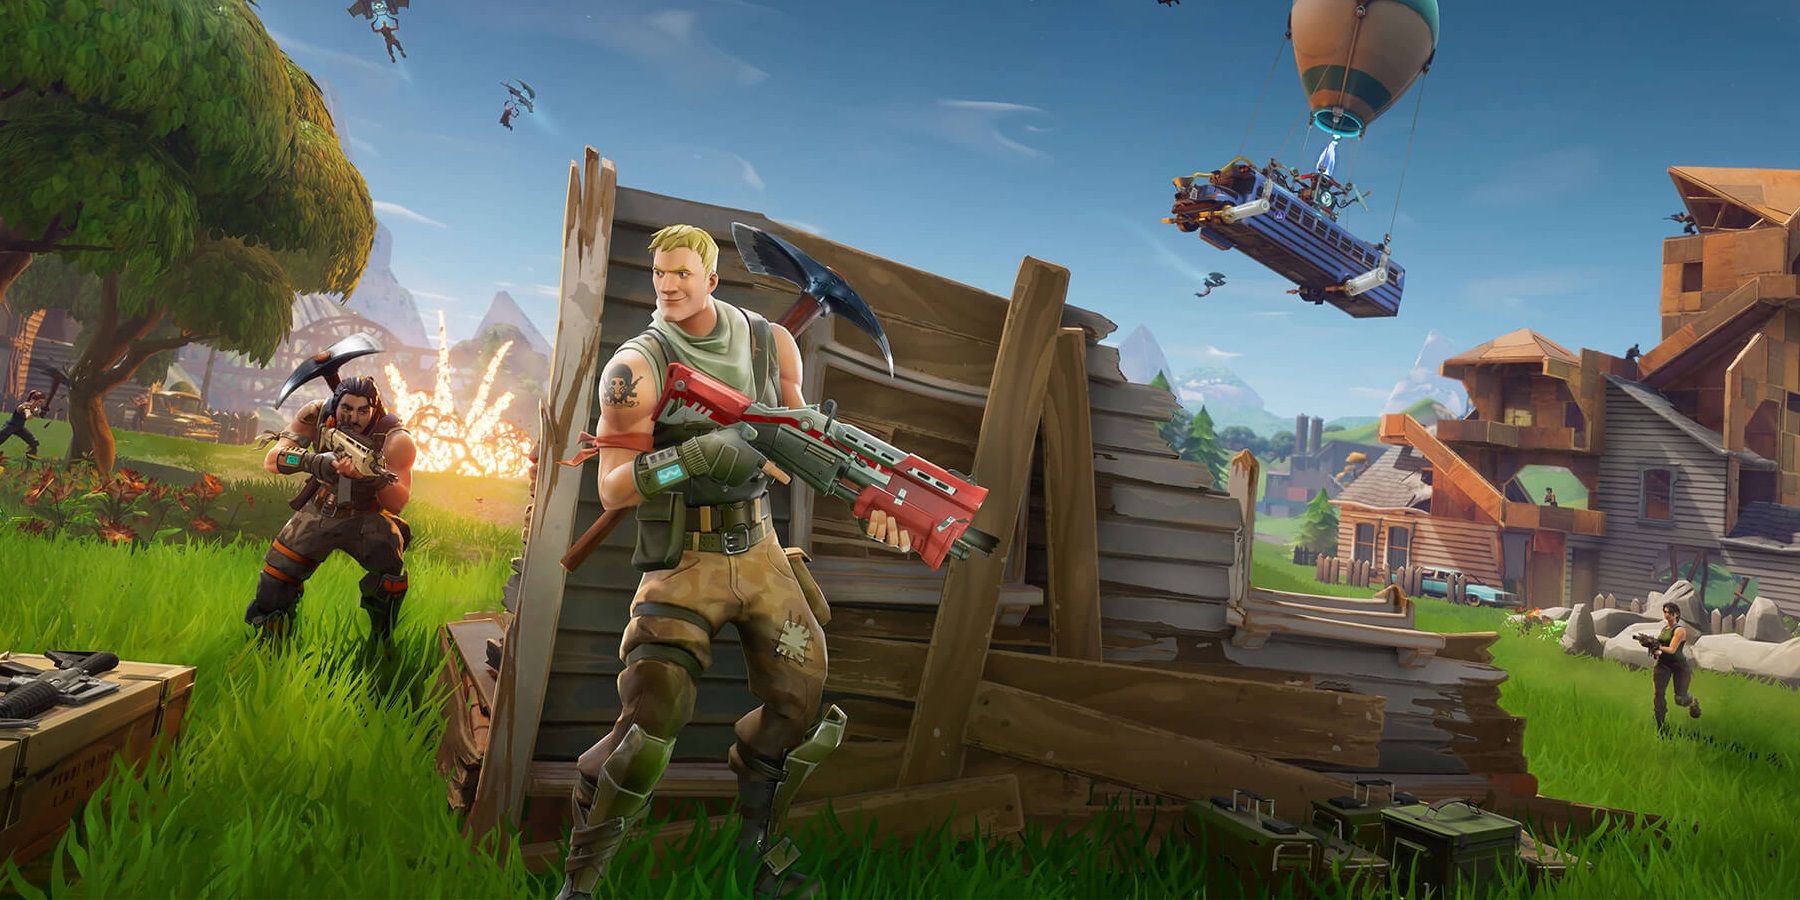 android, fortnite leaks fall guys-inspired feature coming this year